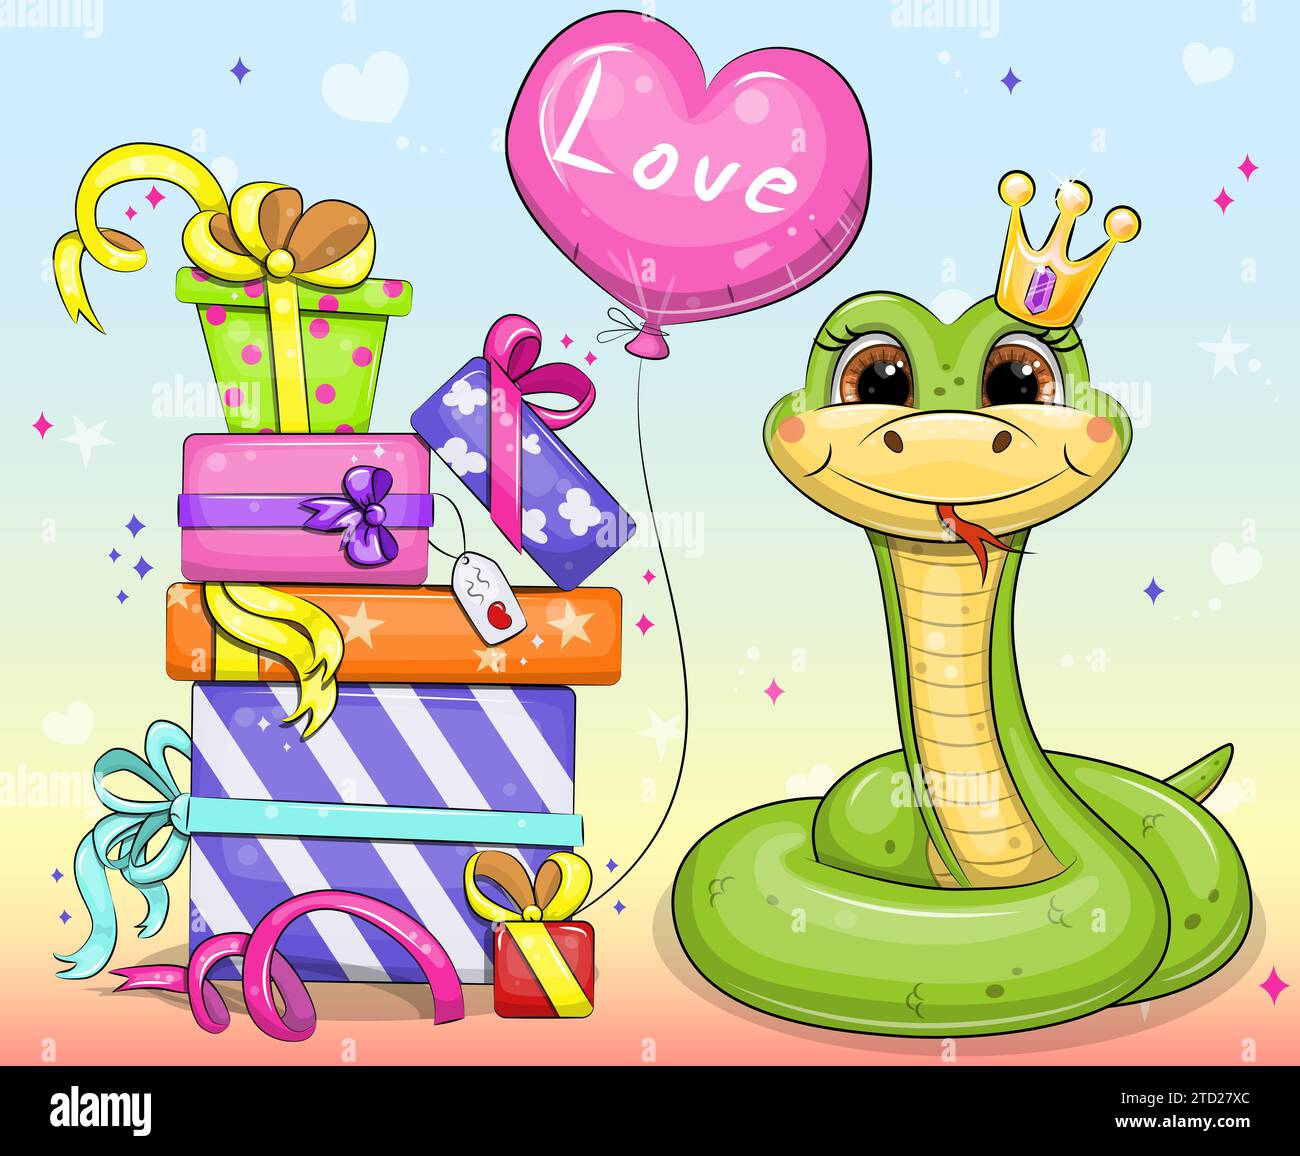 Cute cartoon green snake with gifts and balloon. Animal birthday vector illustration with a colorful background. Stock Vector